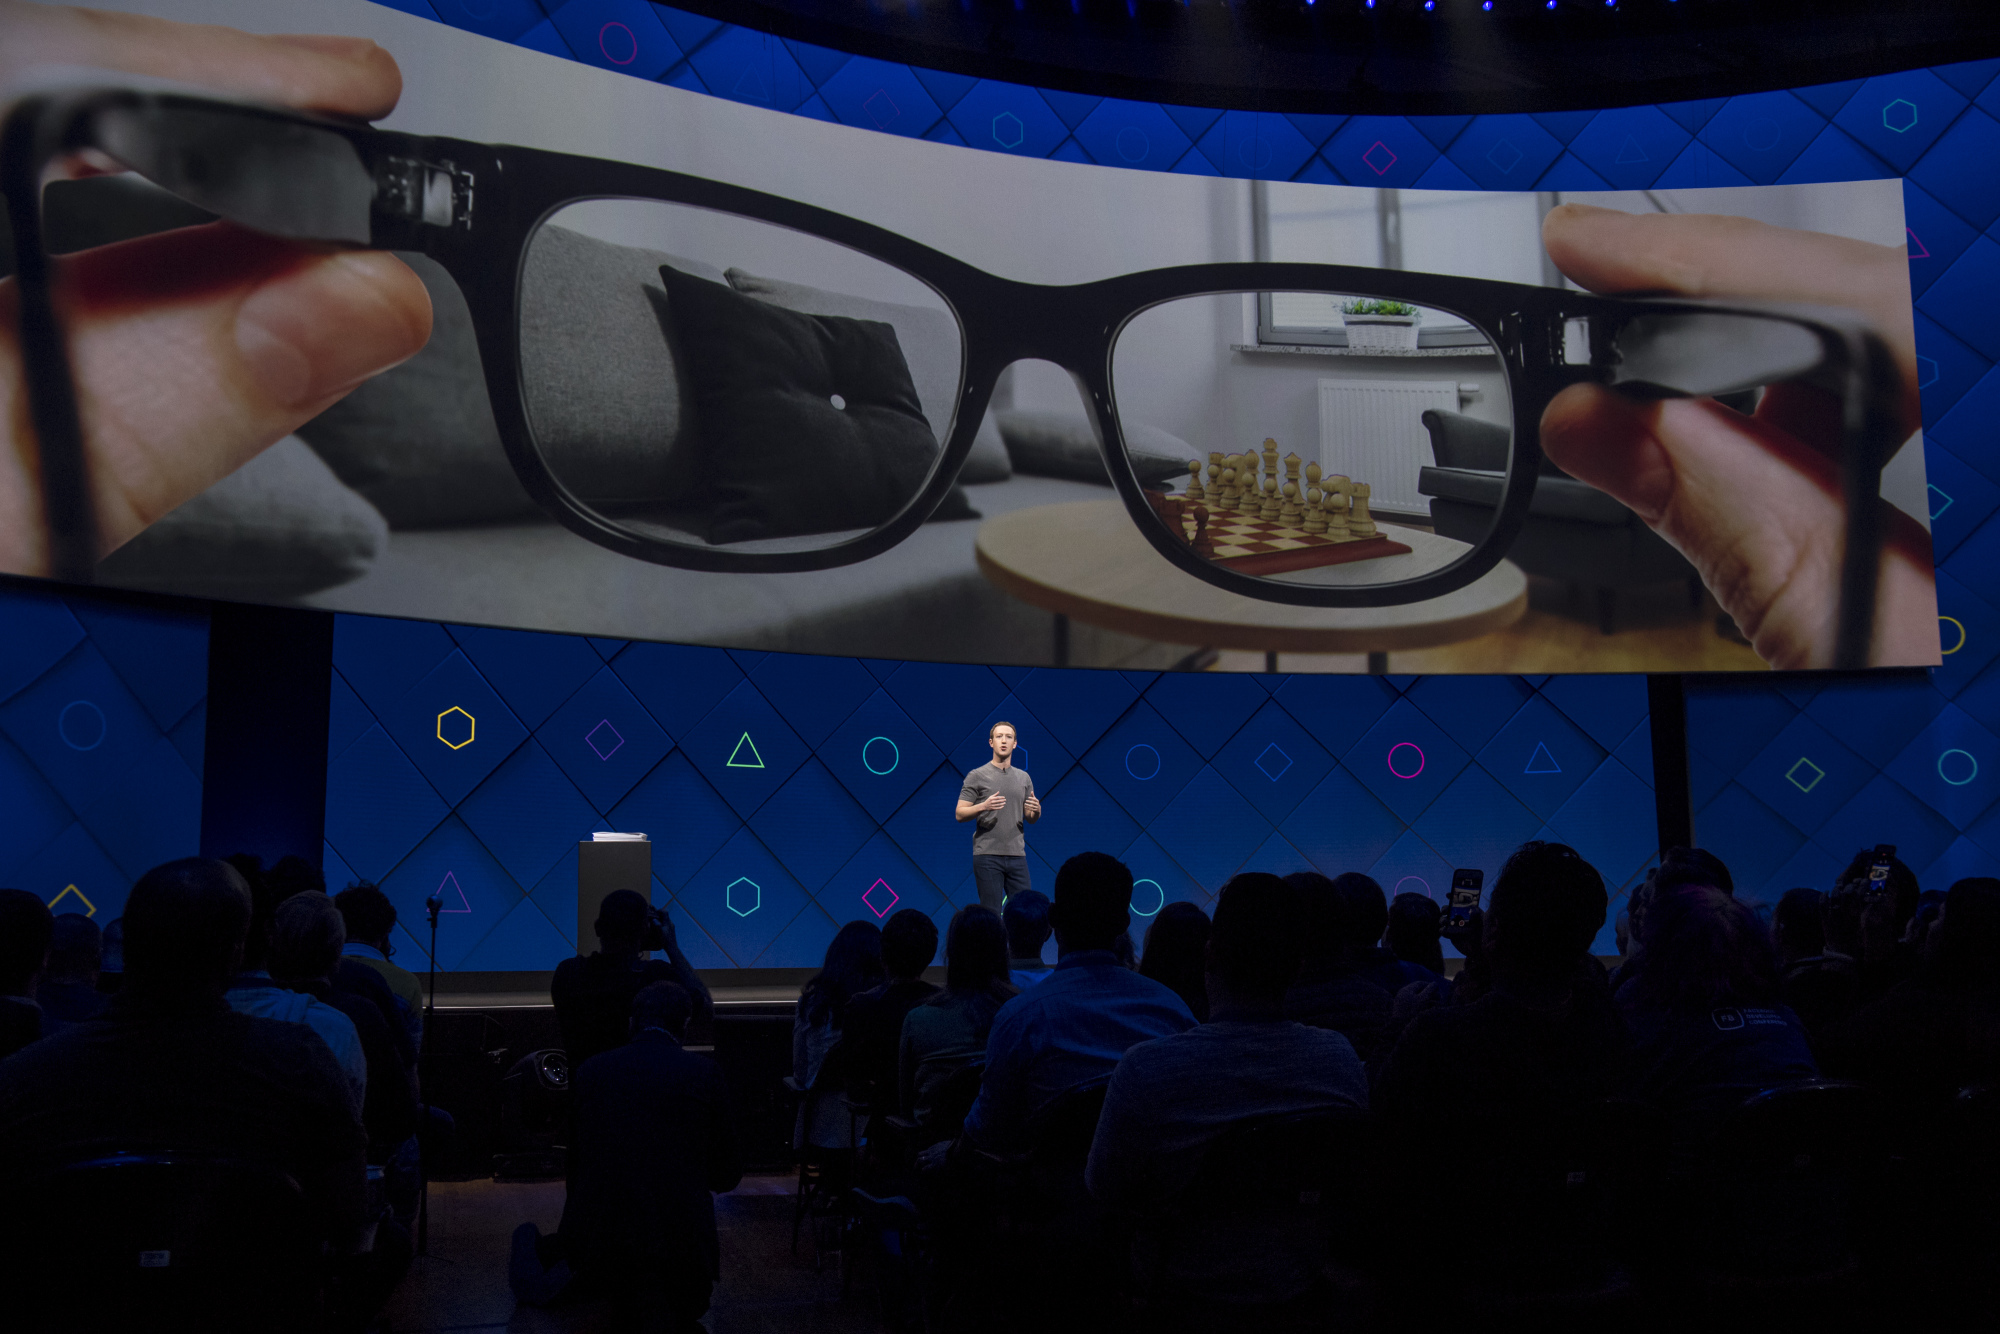 Facebook Smart Glasses Coming 'Sooner Than Later' Without AR - Bloomberg